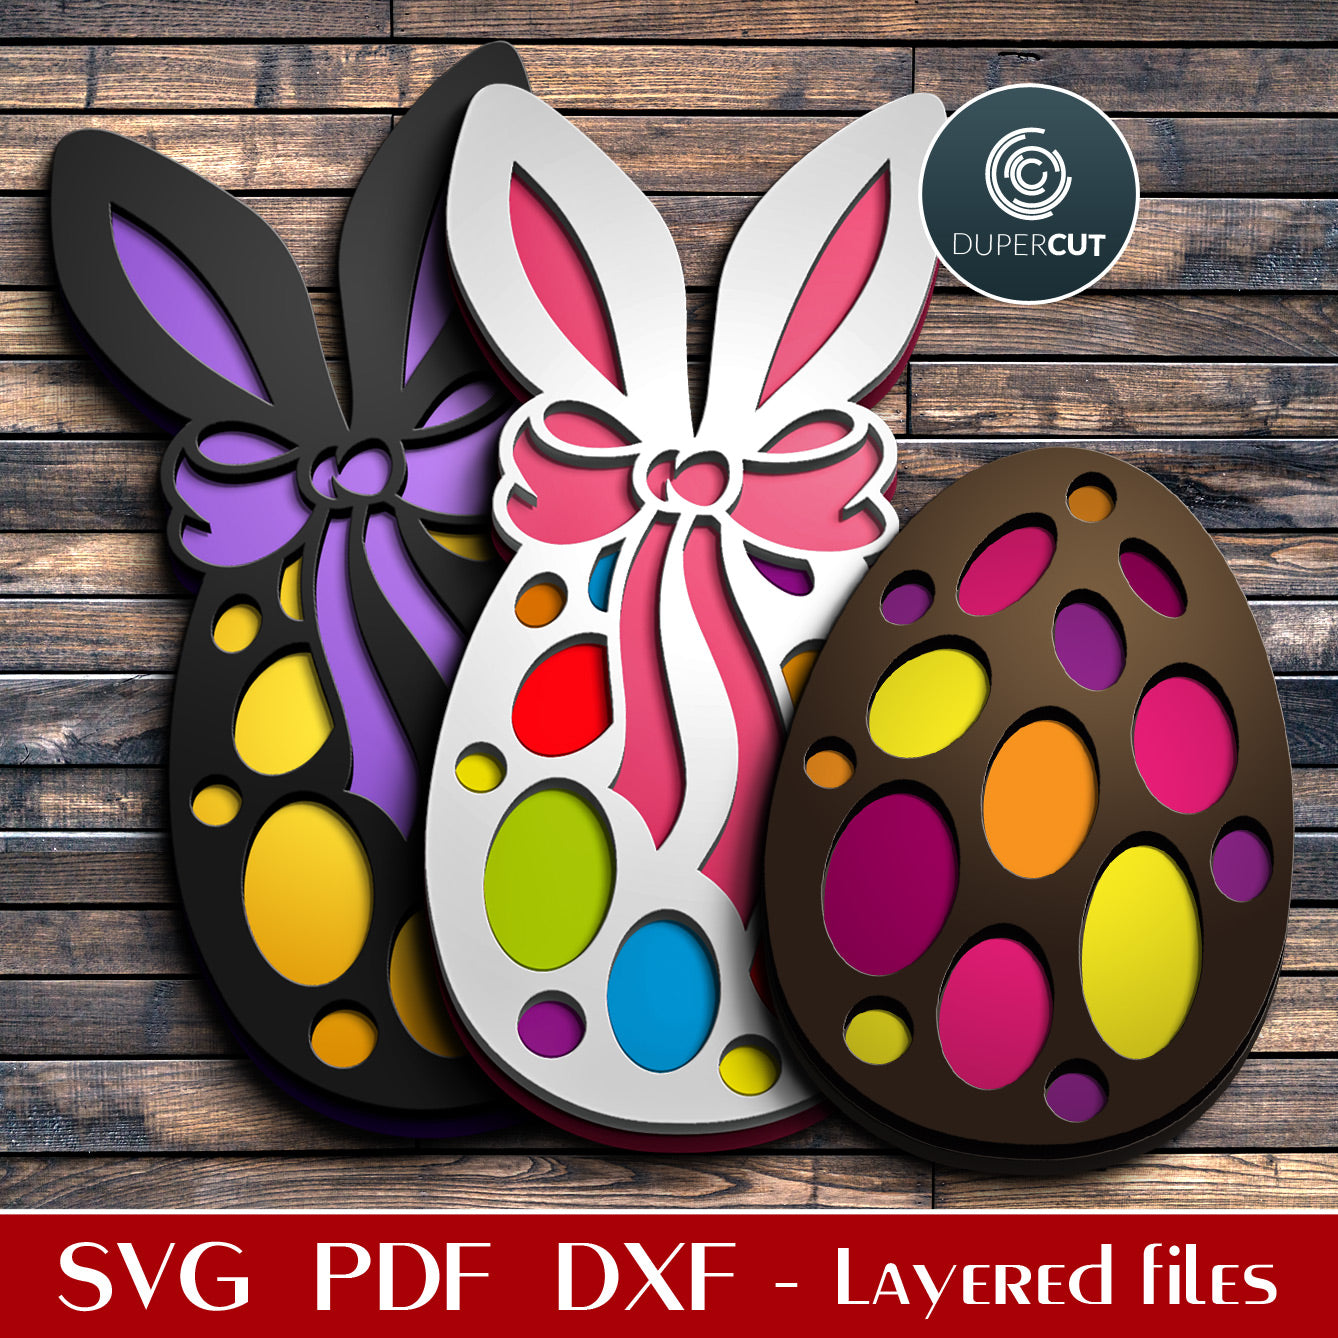 Easter egg with bunny ears DIY decoration - SVG DXF layered vector files for laser cutting with Glowforge, Cricut, Silhouette Cameo, CNC plasma machines, scroll saw by DuperCut.com